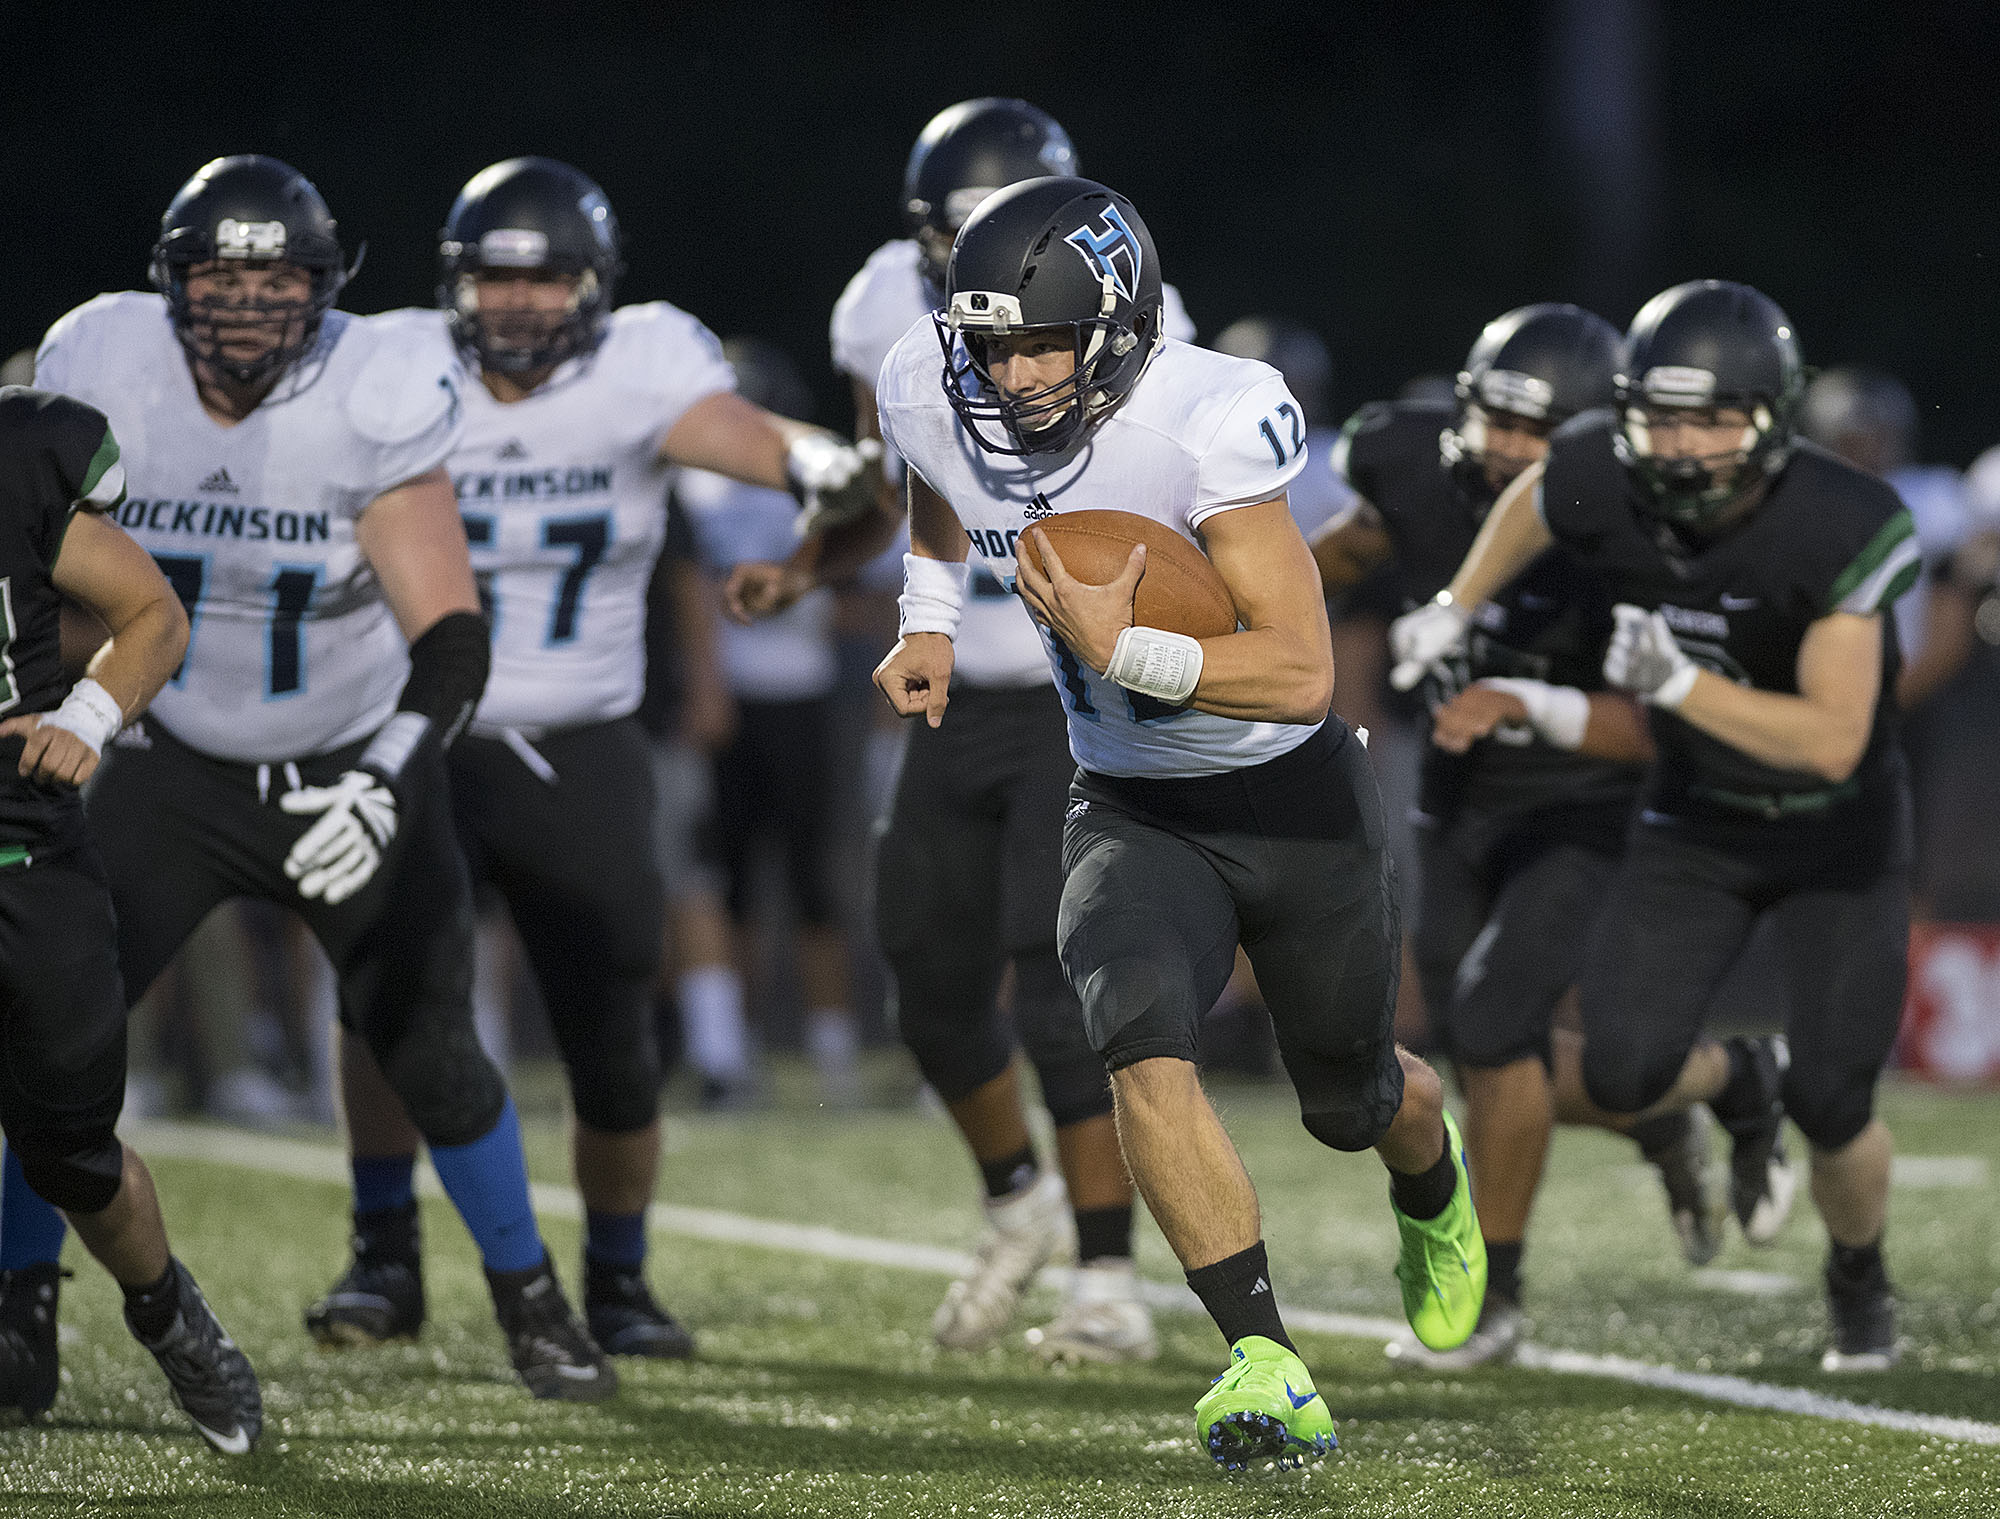 Hockinson's Canon Racanelli (12) breaks through the pack for yardage in the first quarter at Woodland High School on Friday night, Sept. 15, 2017.